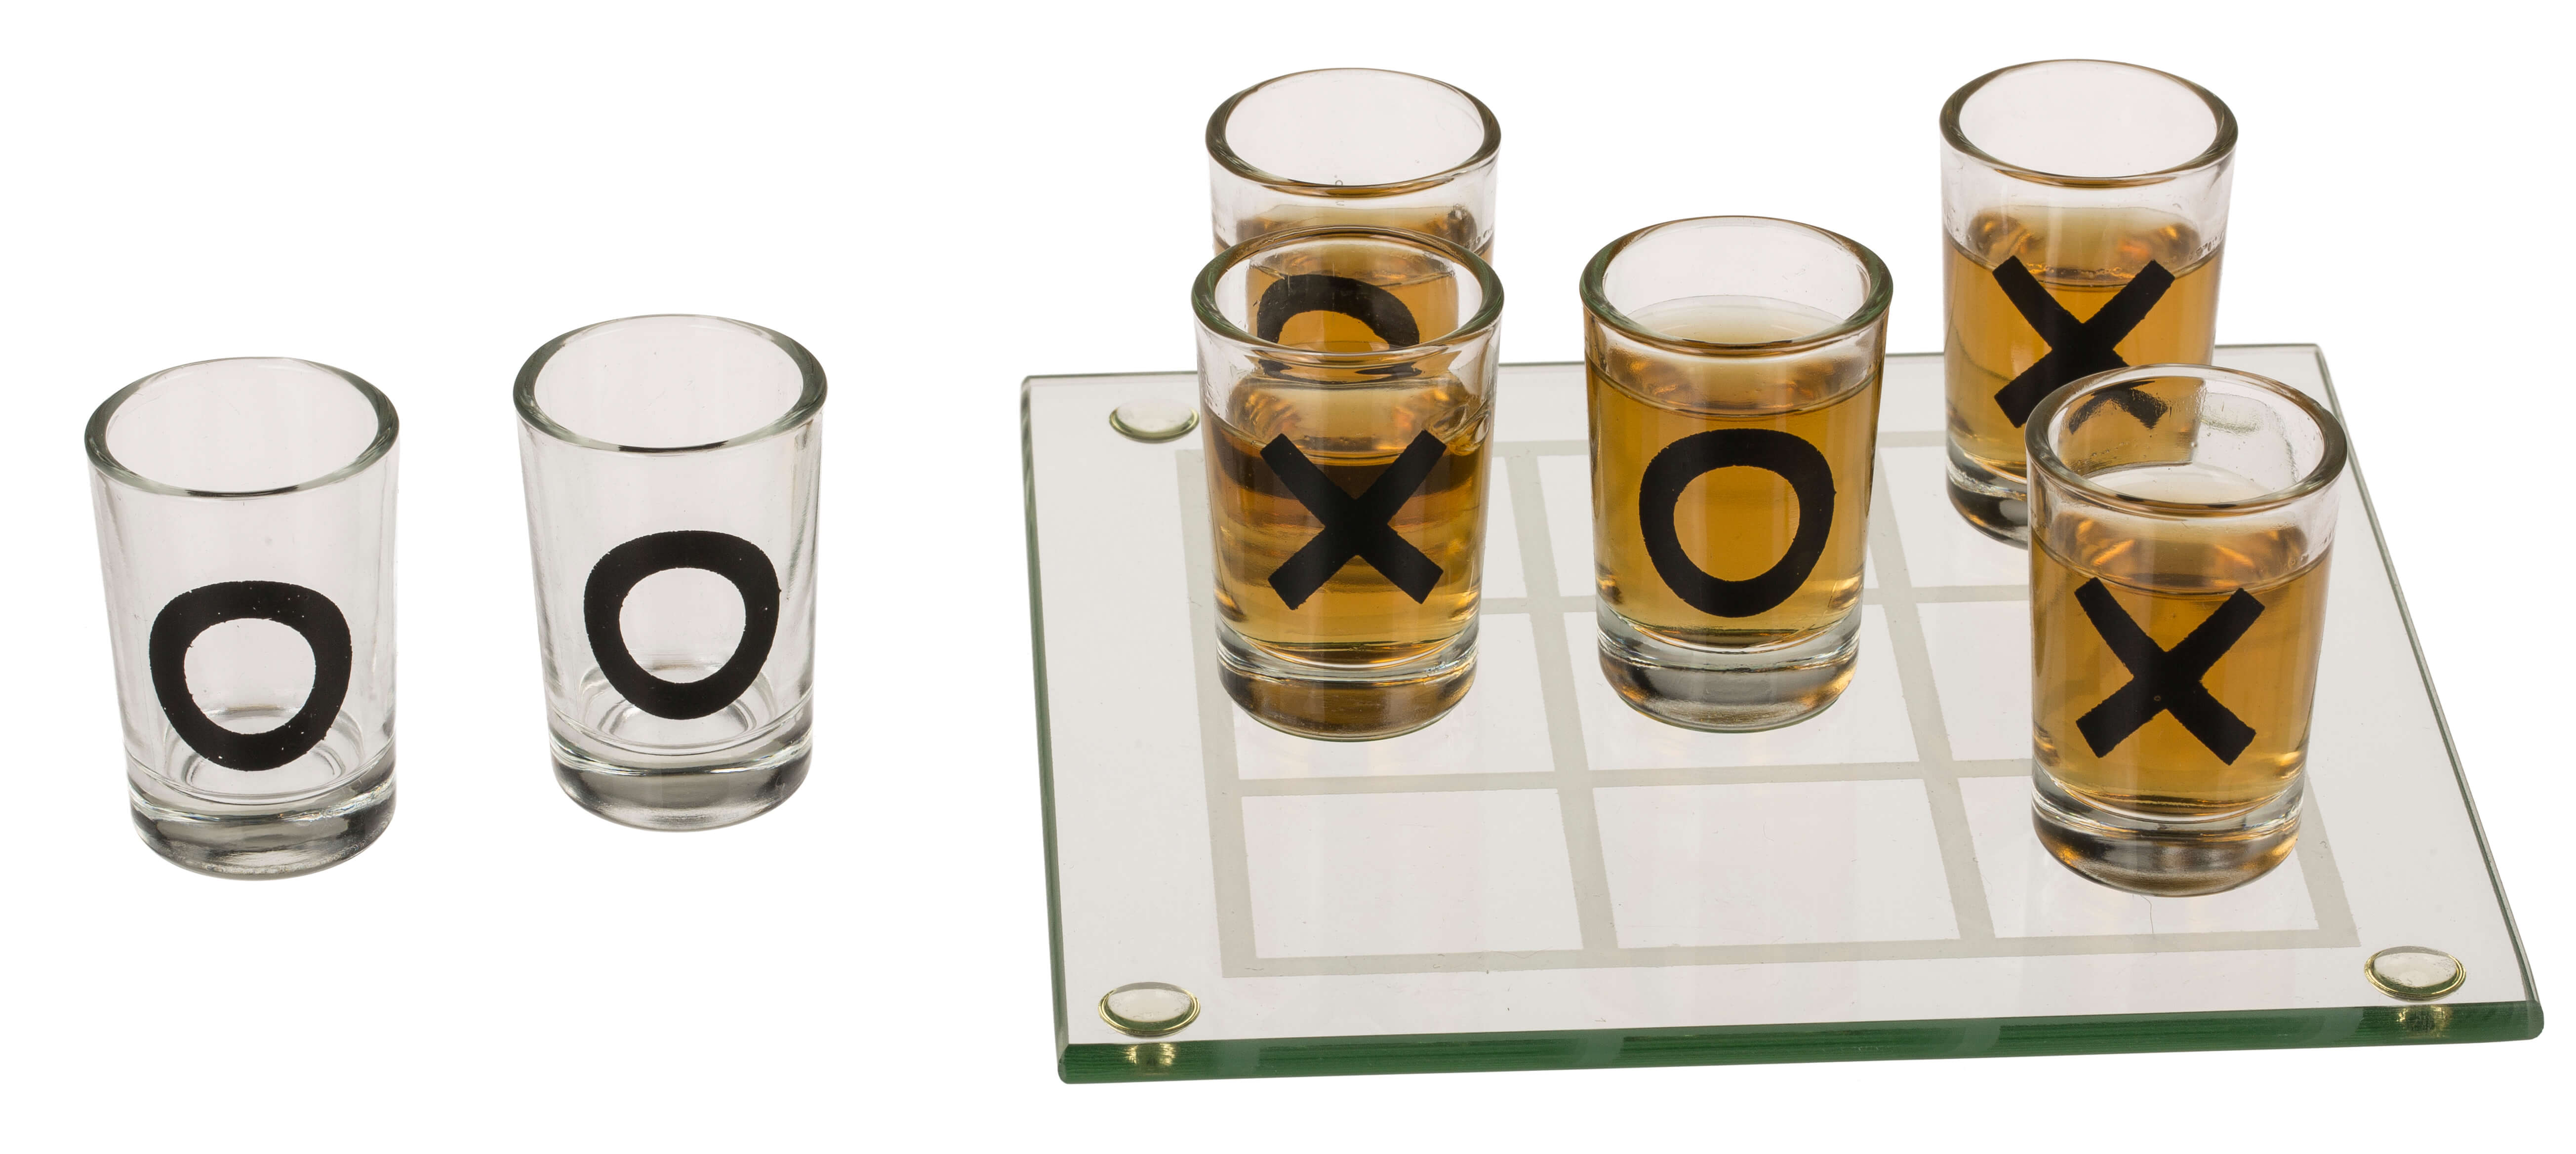 Glass drinking game Tic Tac Toe